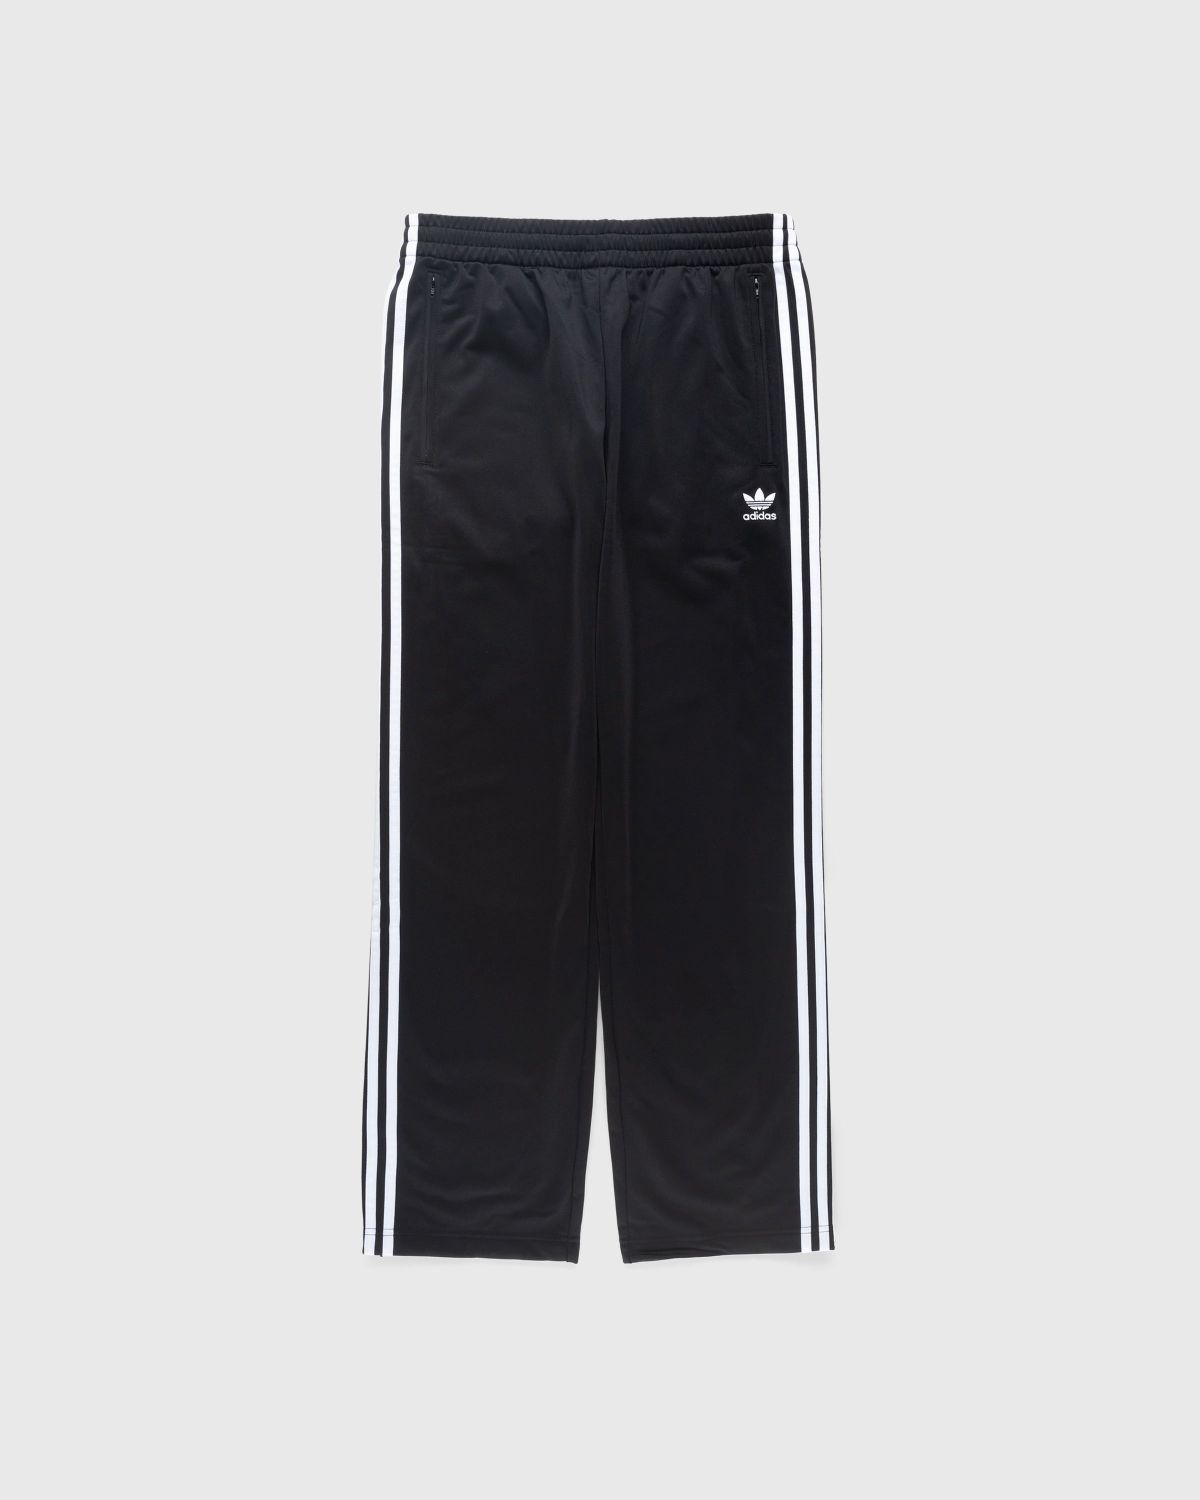 Adidas Adidas The Brand With The 3 Stripes Ivory Climacool Pants